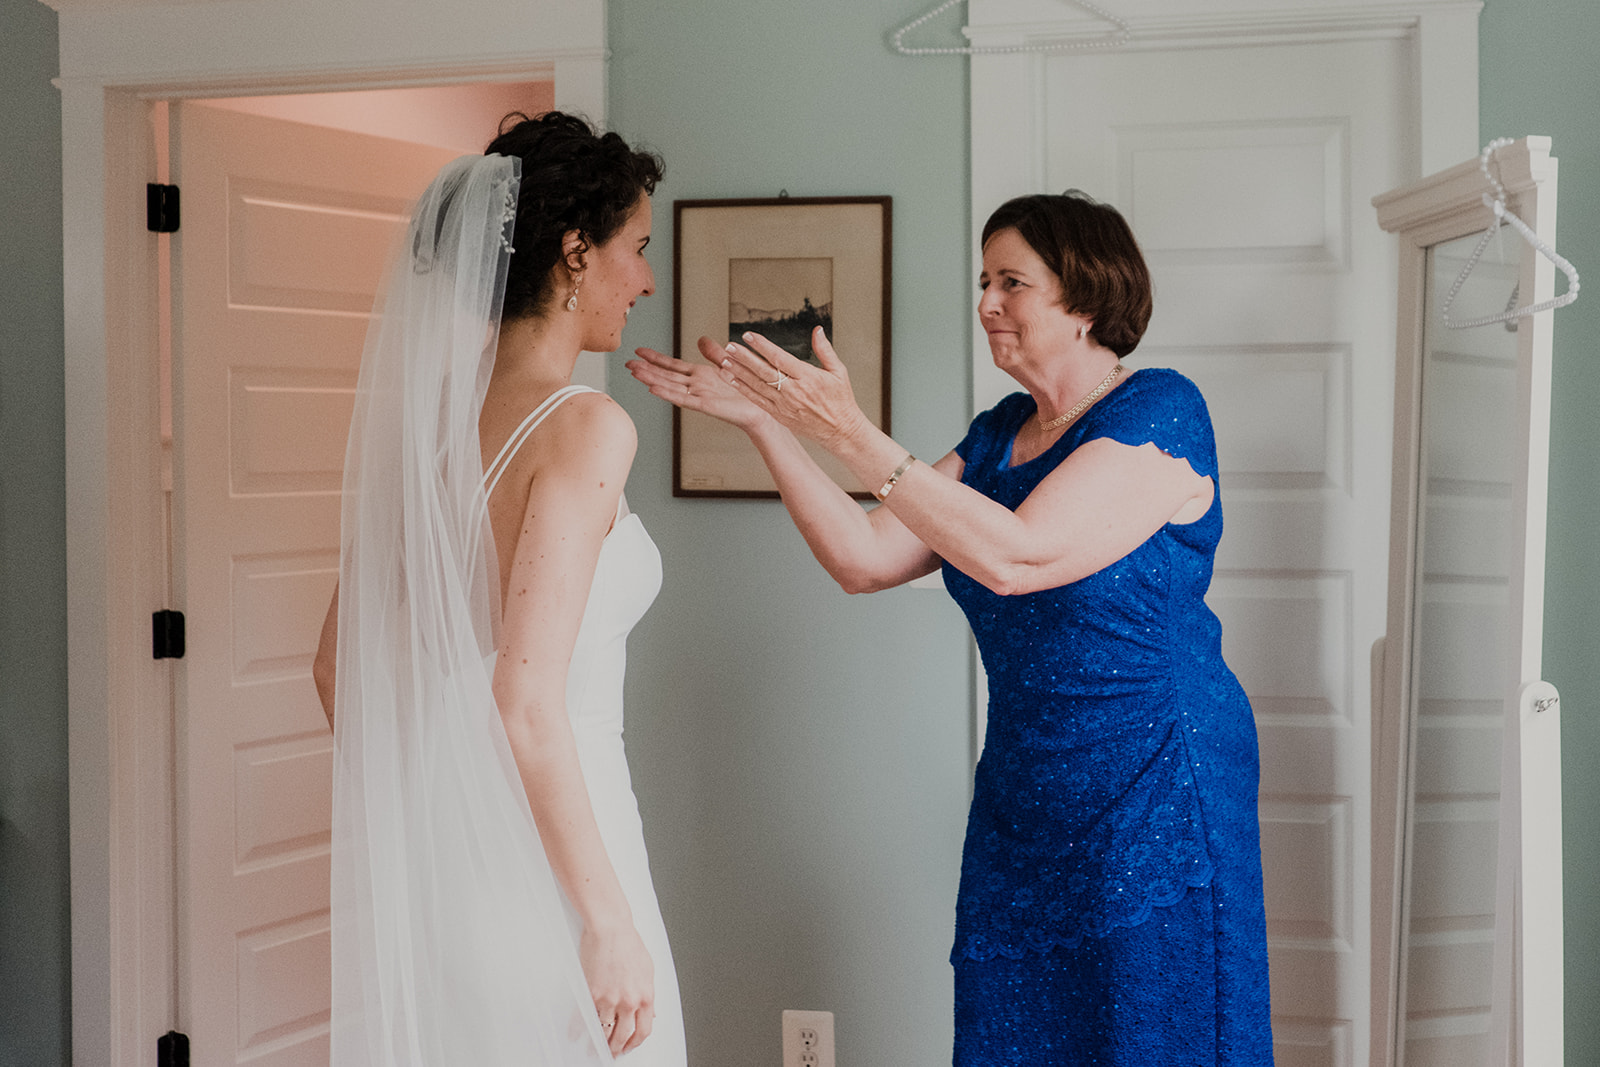 The mother of the bride reaches out to her daughter on her wedding day at Blue Hill Farm in Waterford, VA.